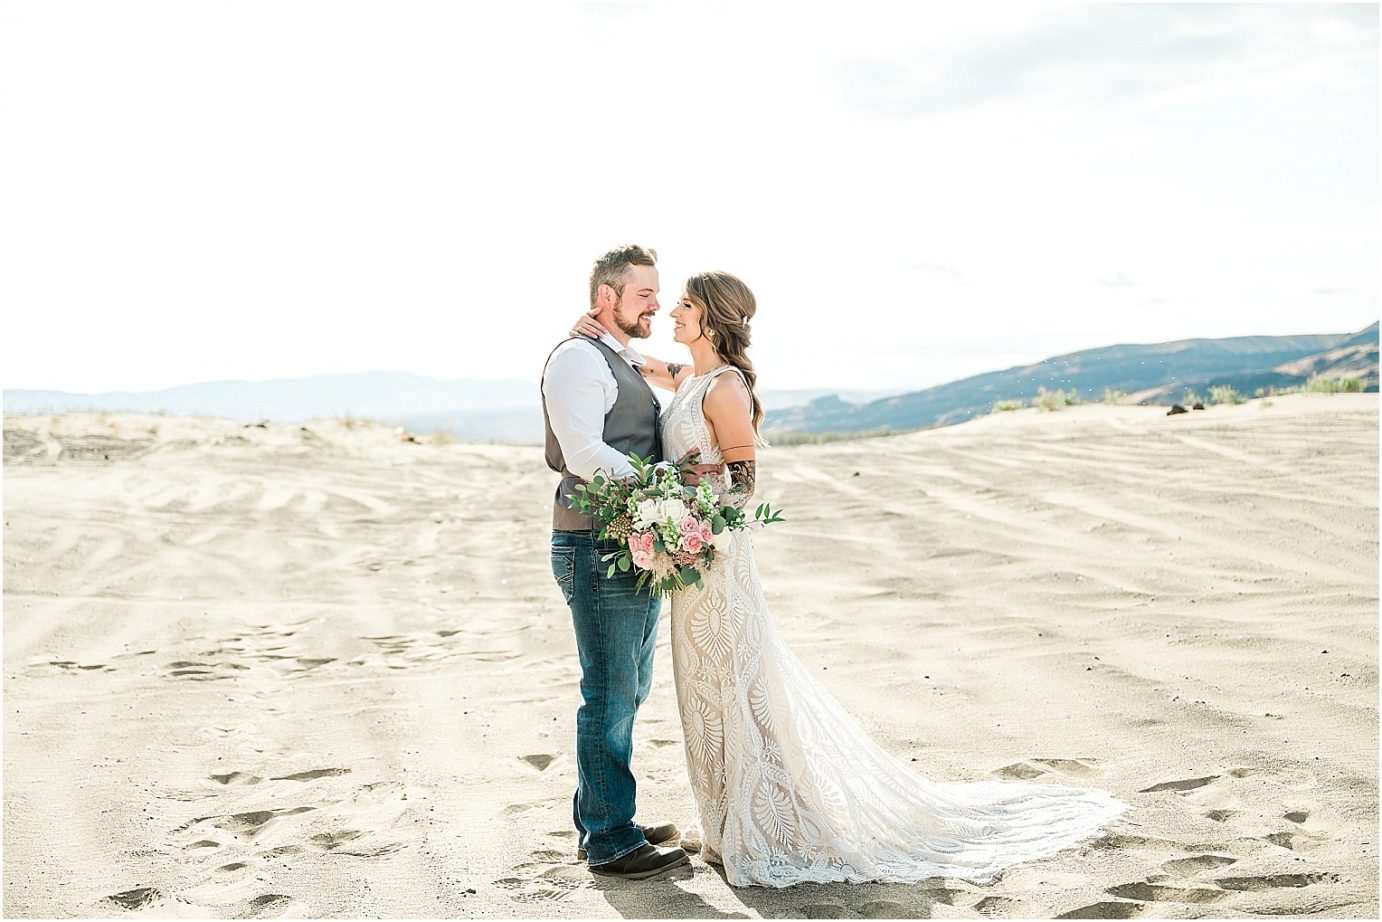 Eastern Washington Elopement Photographer Mike and Carley couple standing on sand dunes